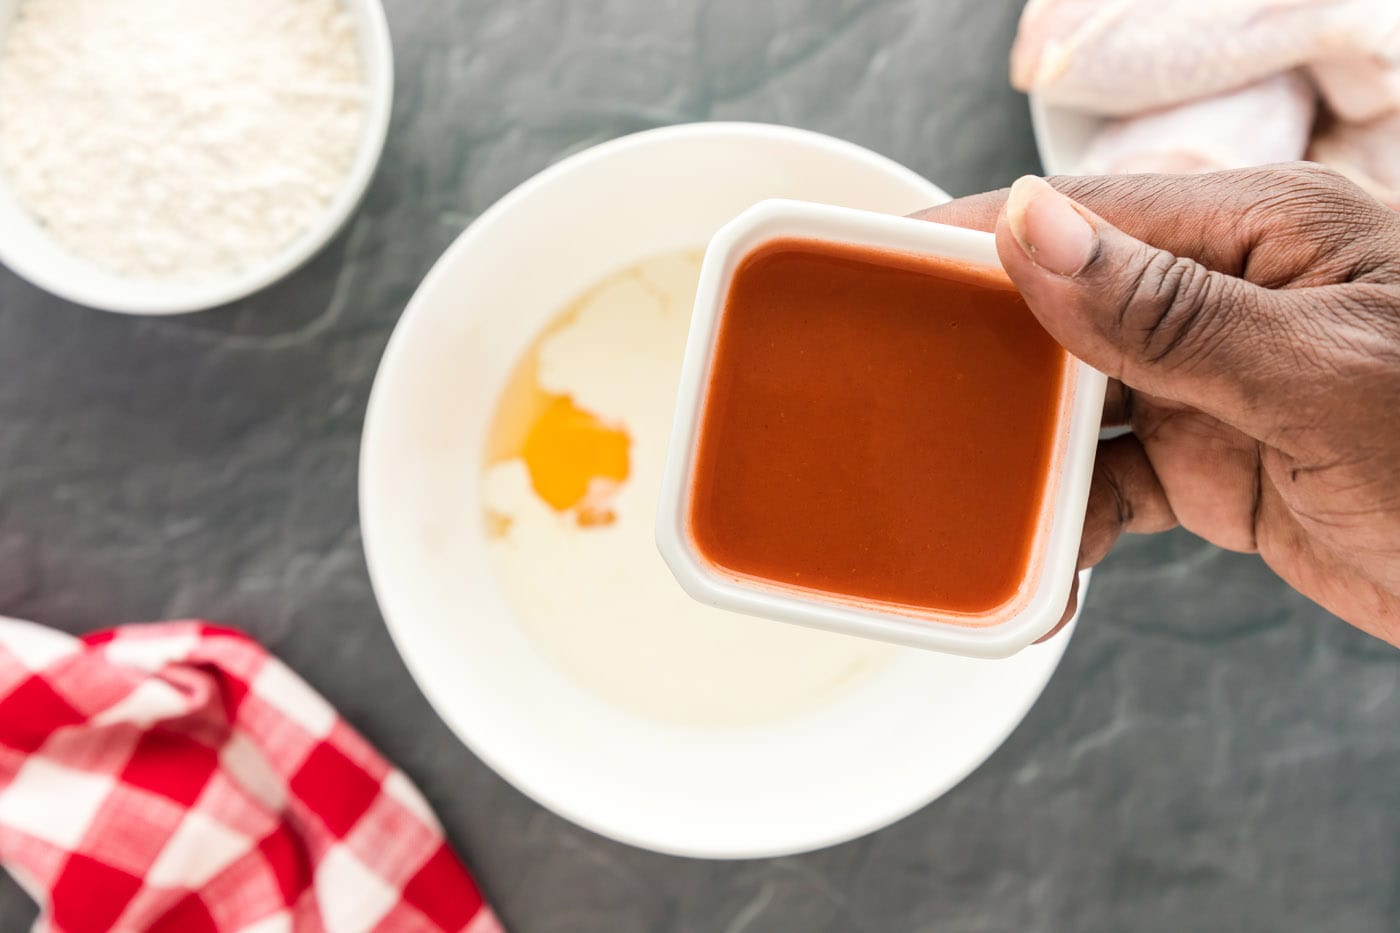 adding hot sauce to cream mixture with spices